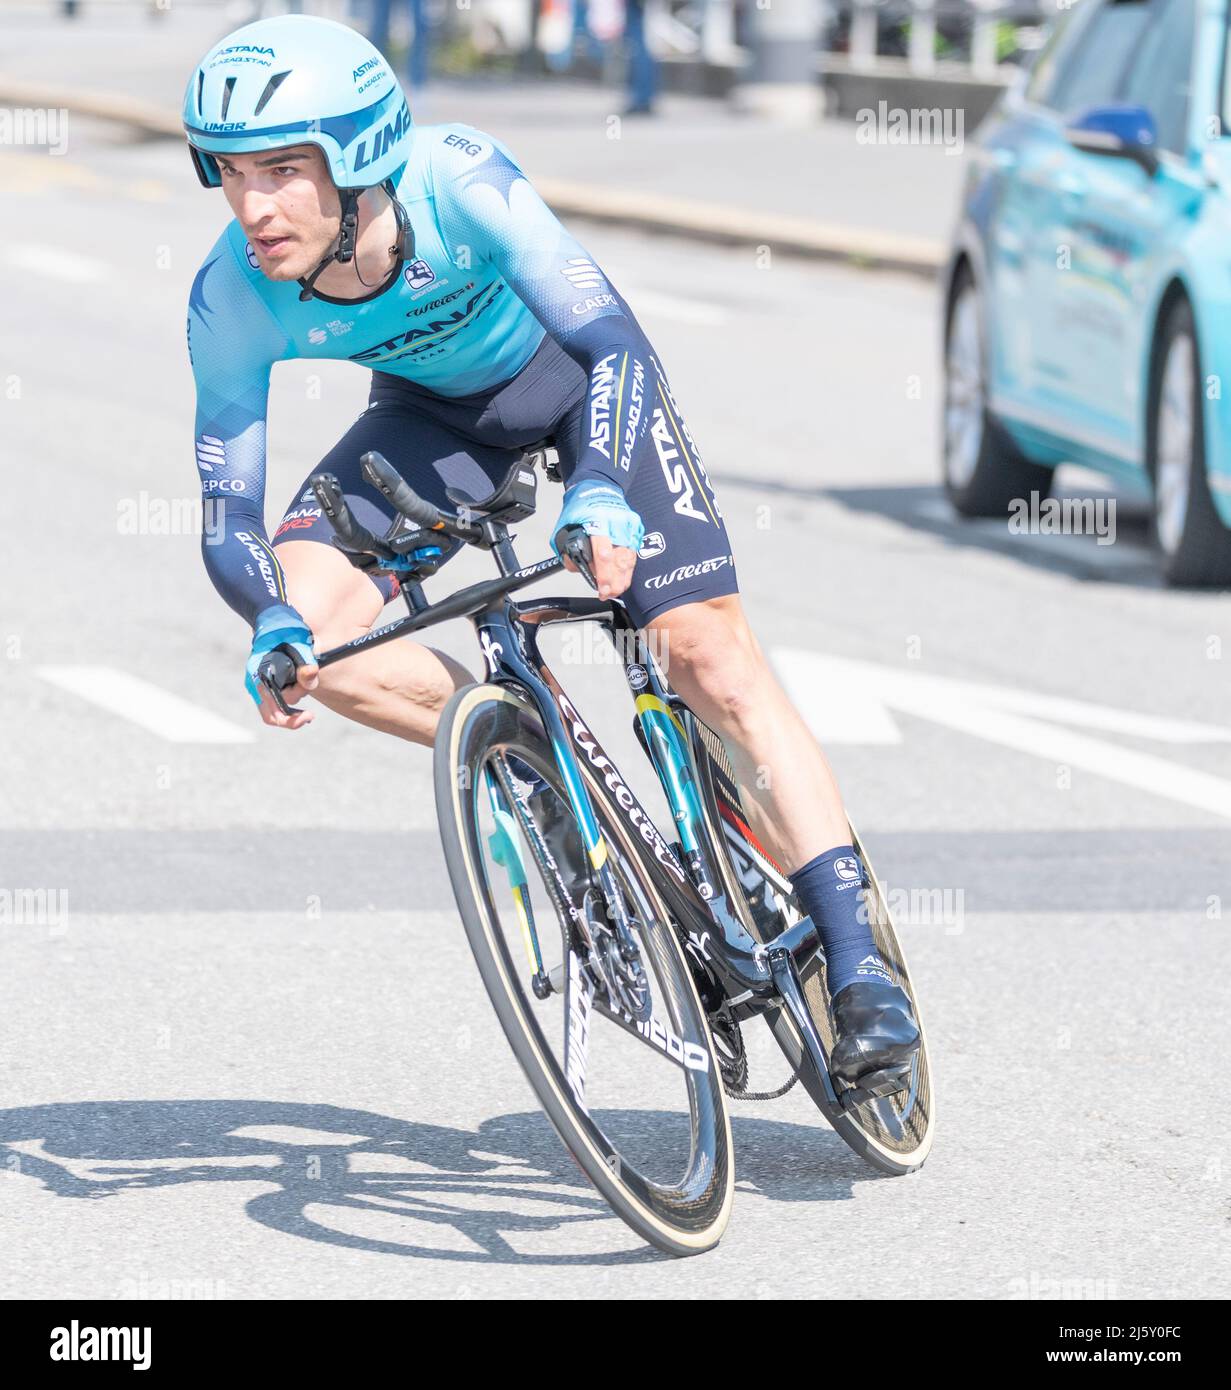 Lausanne Switzerland, 04/26/2022: Casper PEDERSEN of   Denmark is in action during the Prologue of the Tour of Romandie 2022. Credit: Eric Dubost/Alamy Live News. Stock Photo